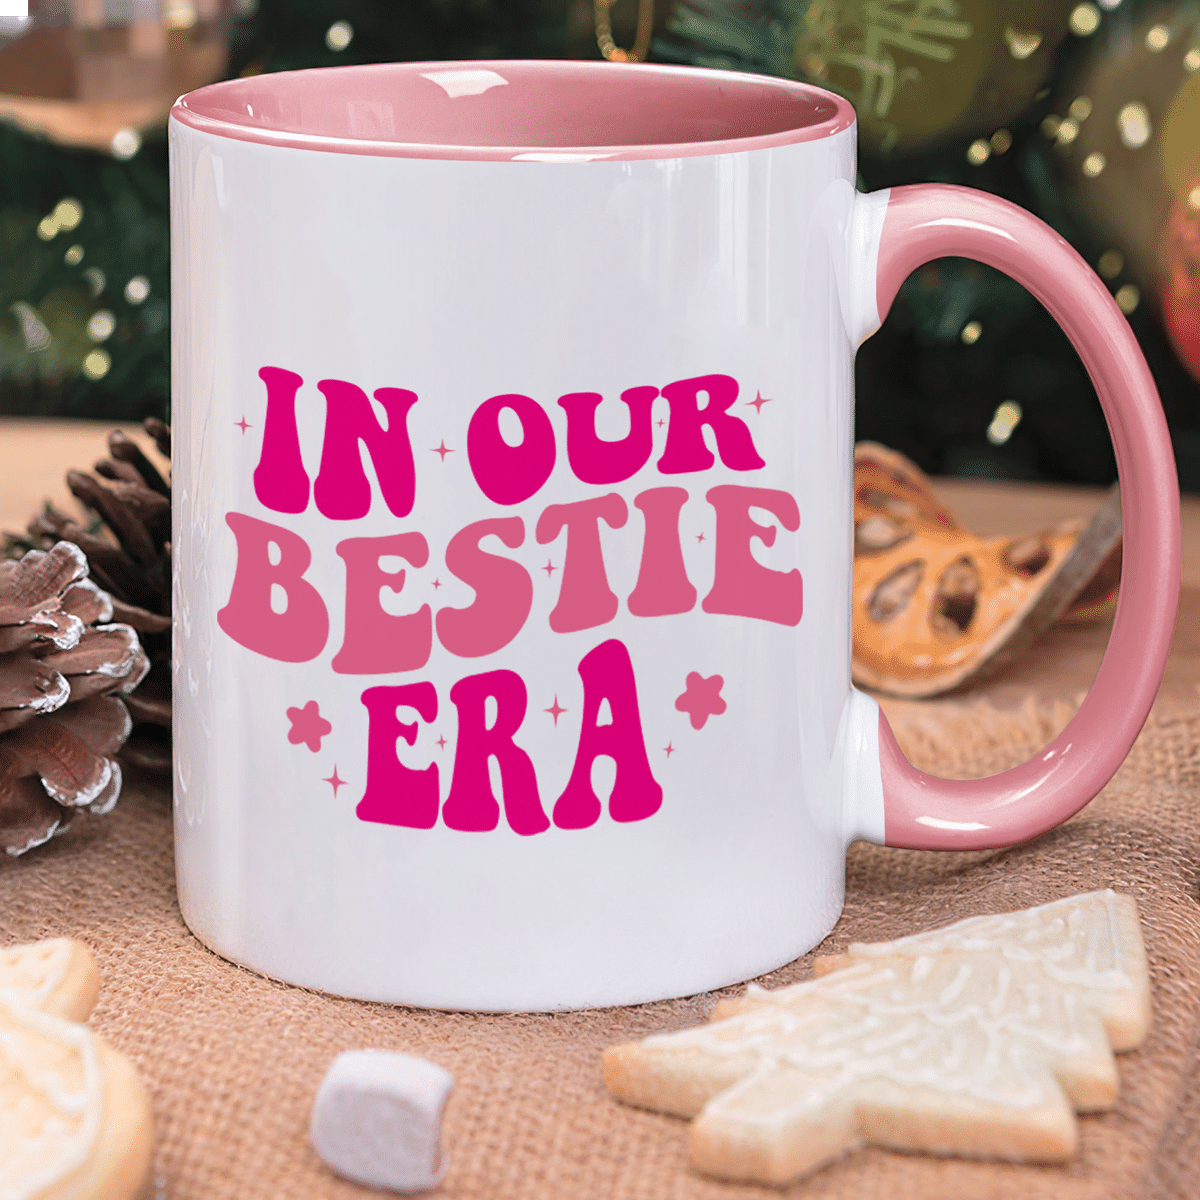 Personalized Mug - The Best Mug Ever - Pink Dolls - In Our Bestie Era - Novelty Gifts For Her (N3)_2